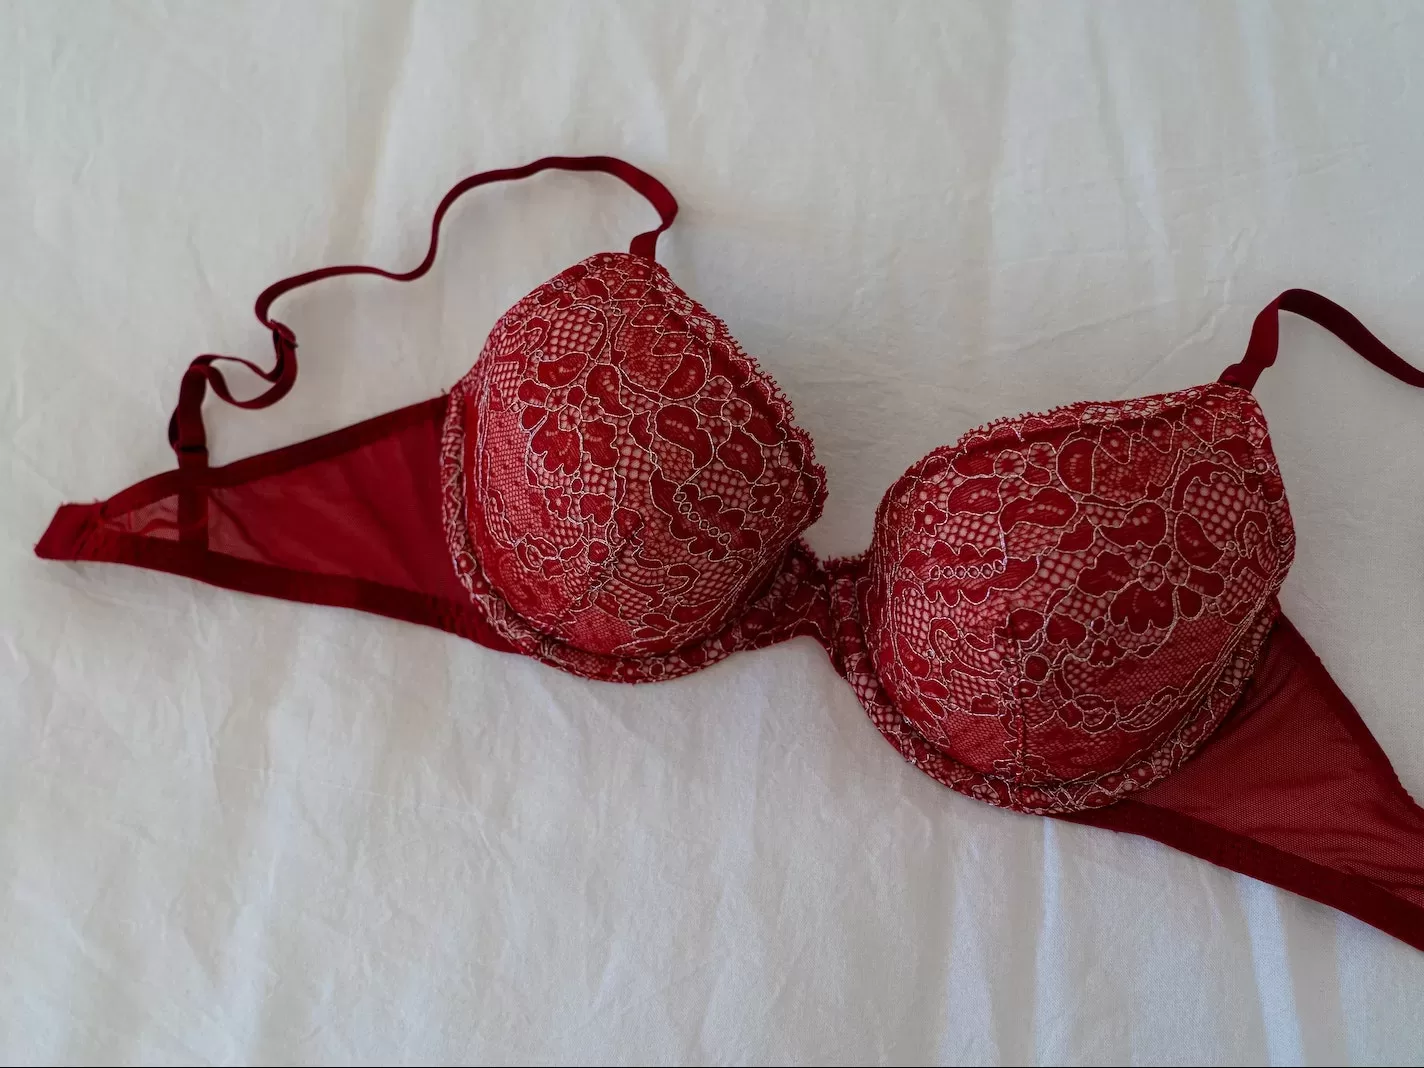 Red Brassiere on White Textile